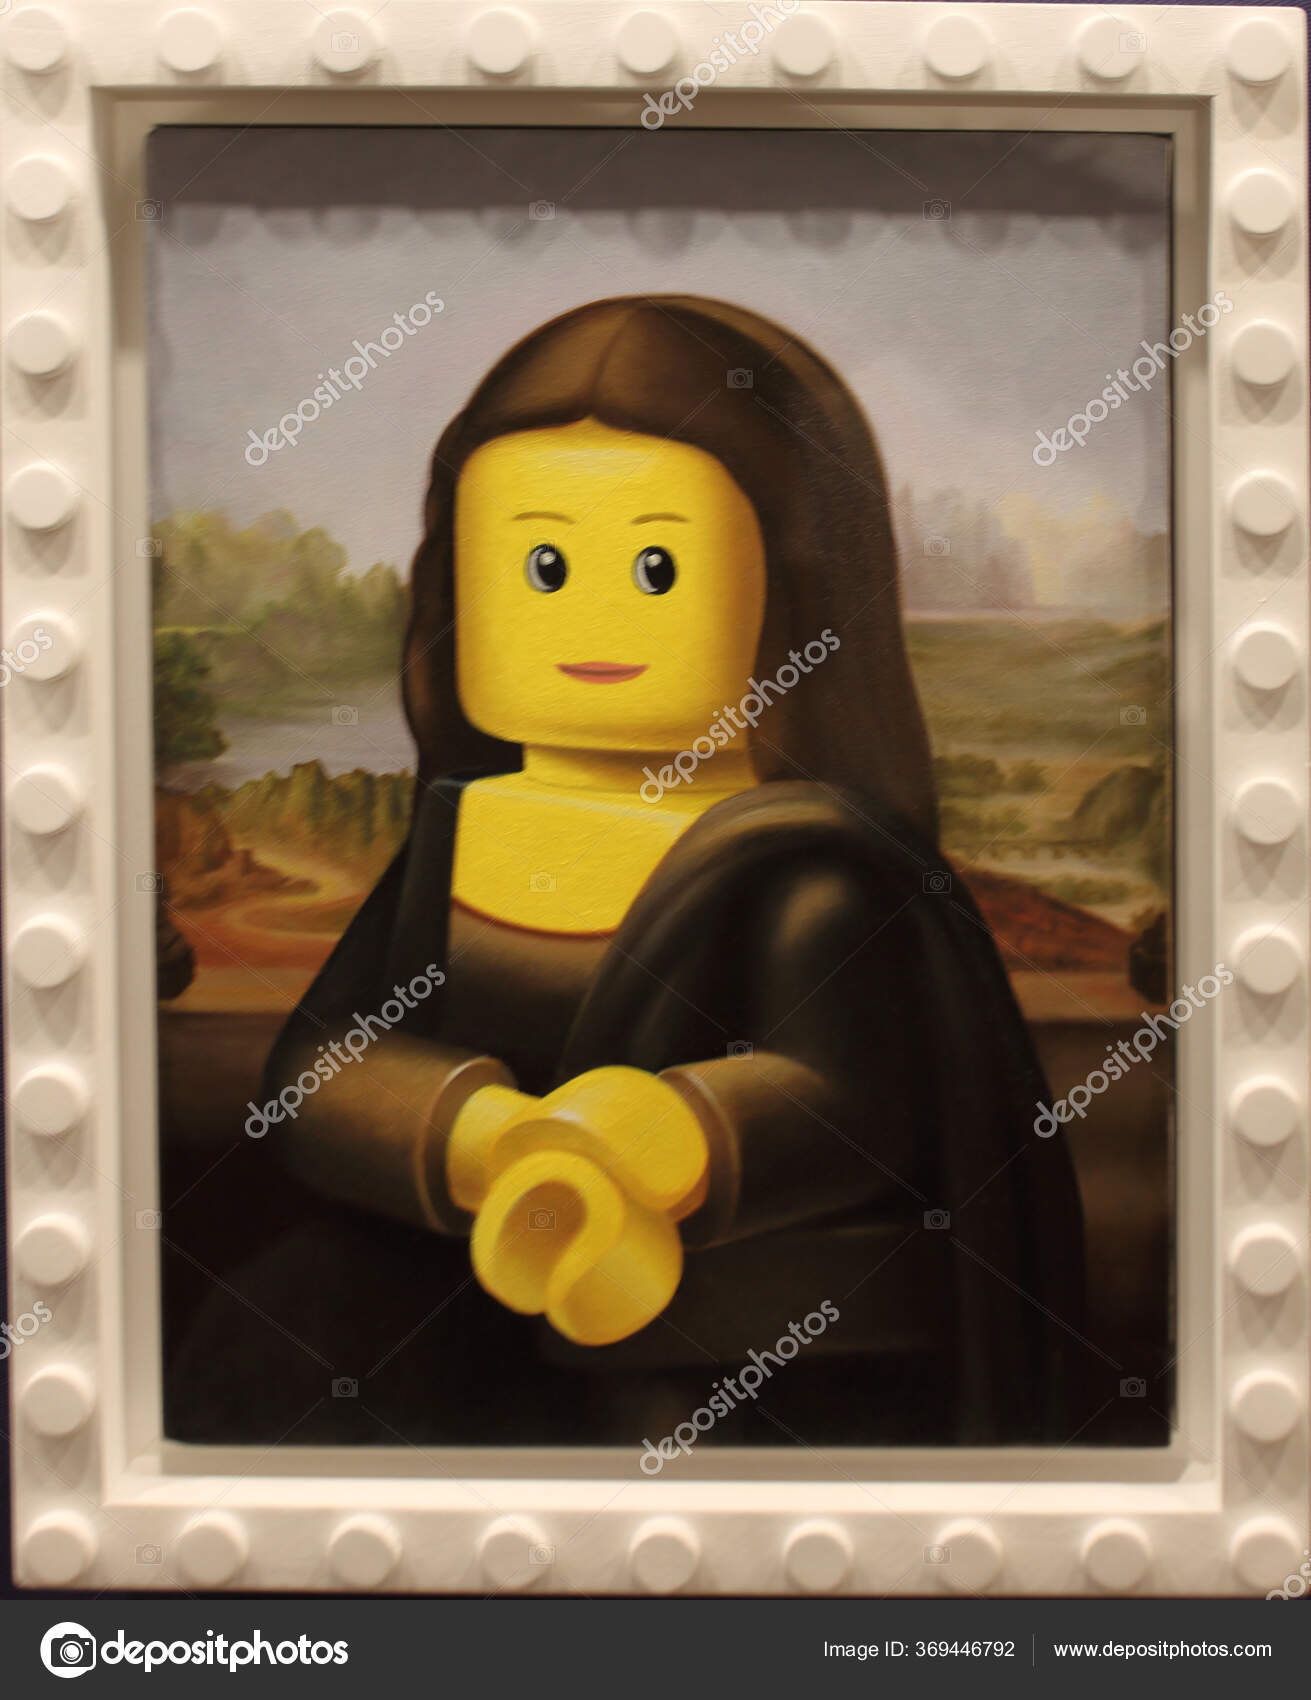 Funny lego frame with famous paints parody using minifigure Stock